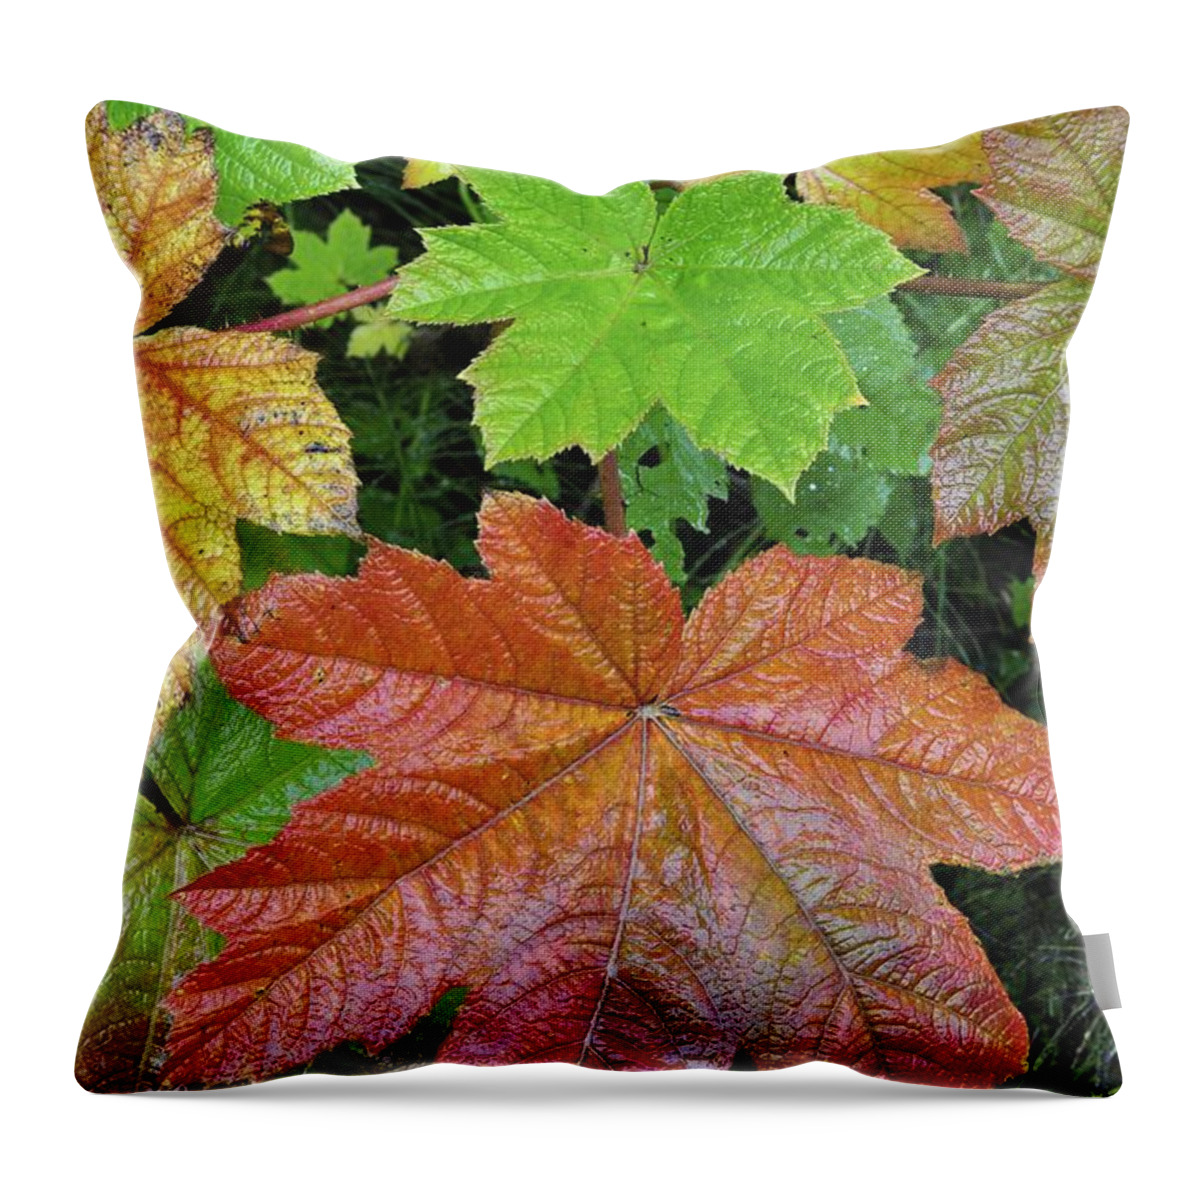 Fall Throw Pillow featuring the photograph Autumn Devil's Club by Cathy Mahnke